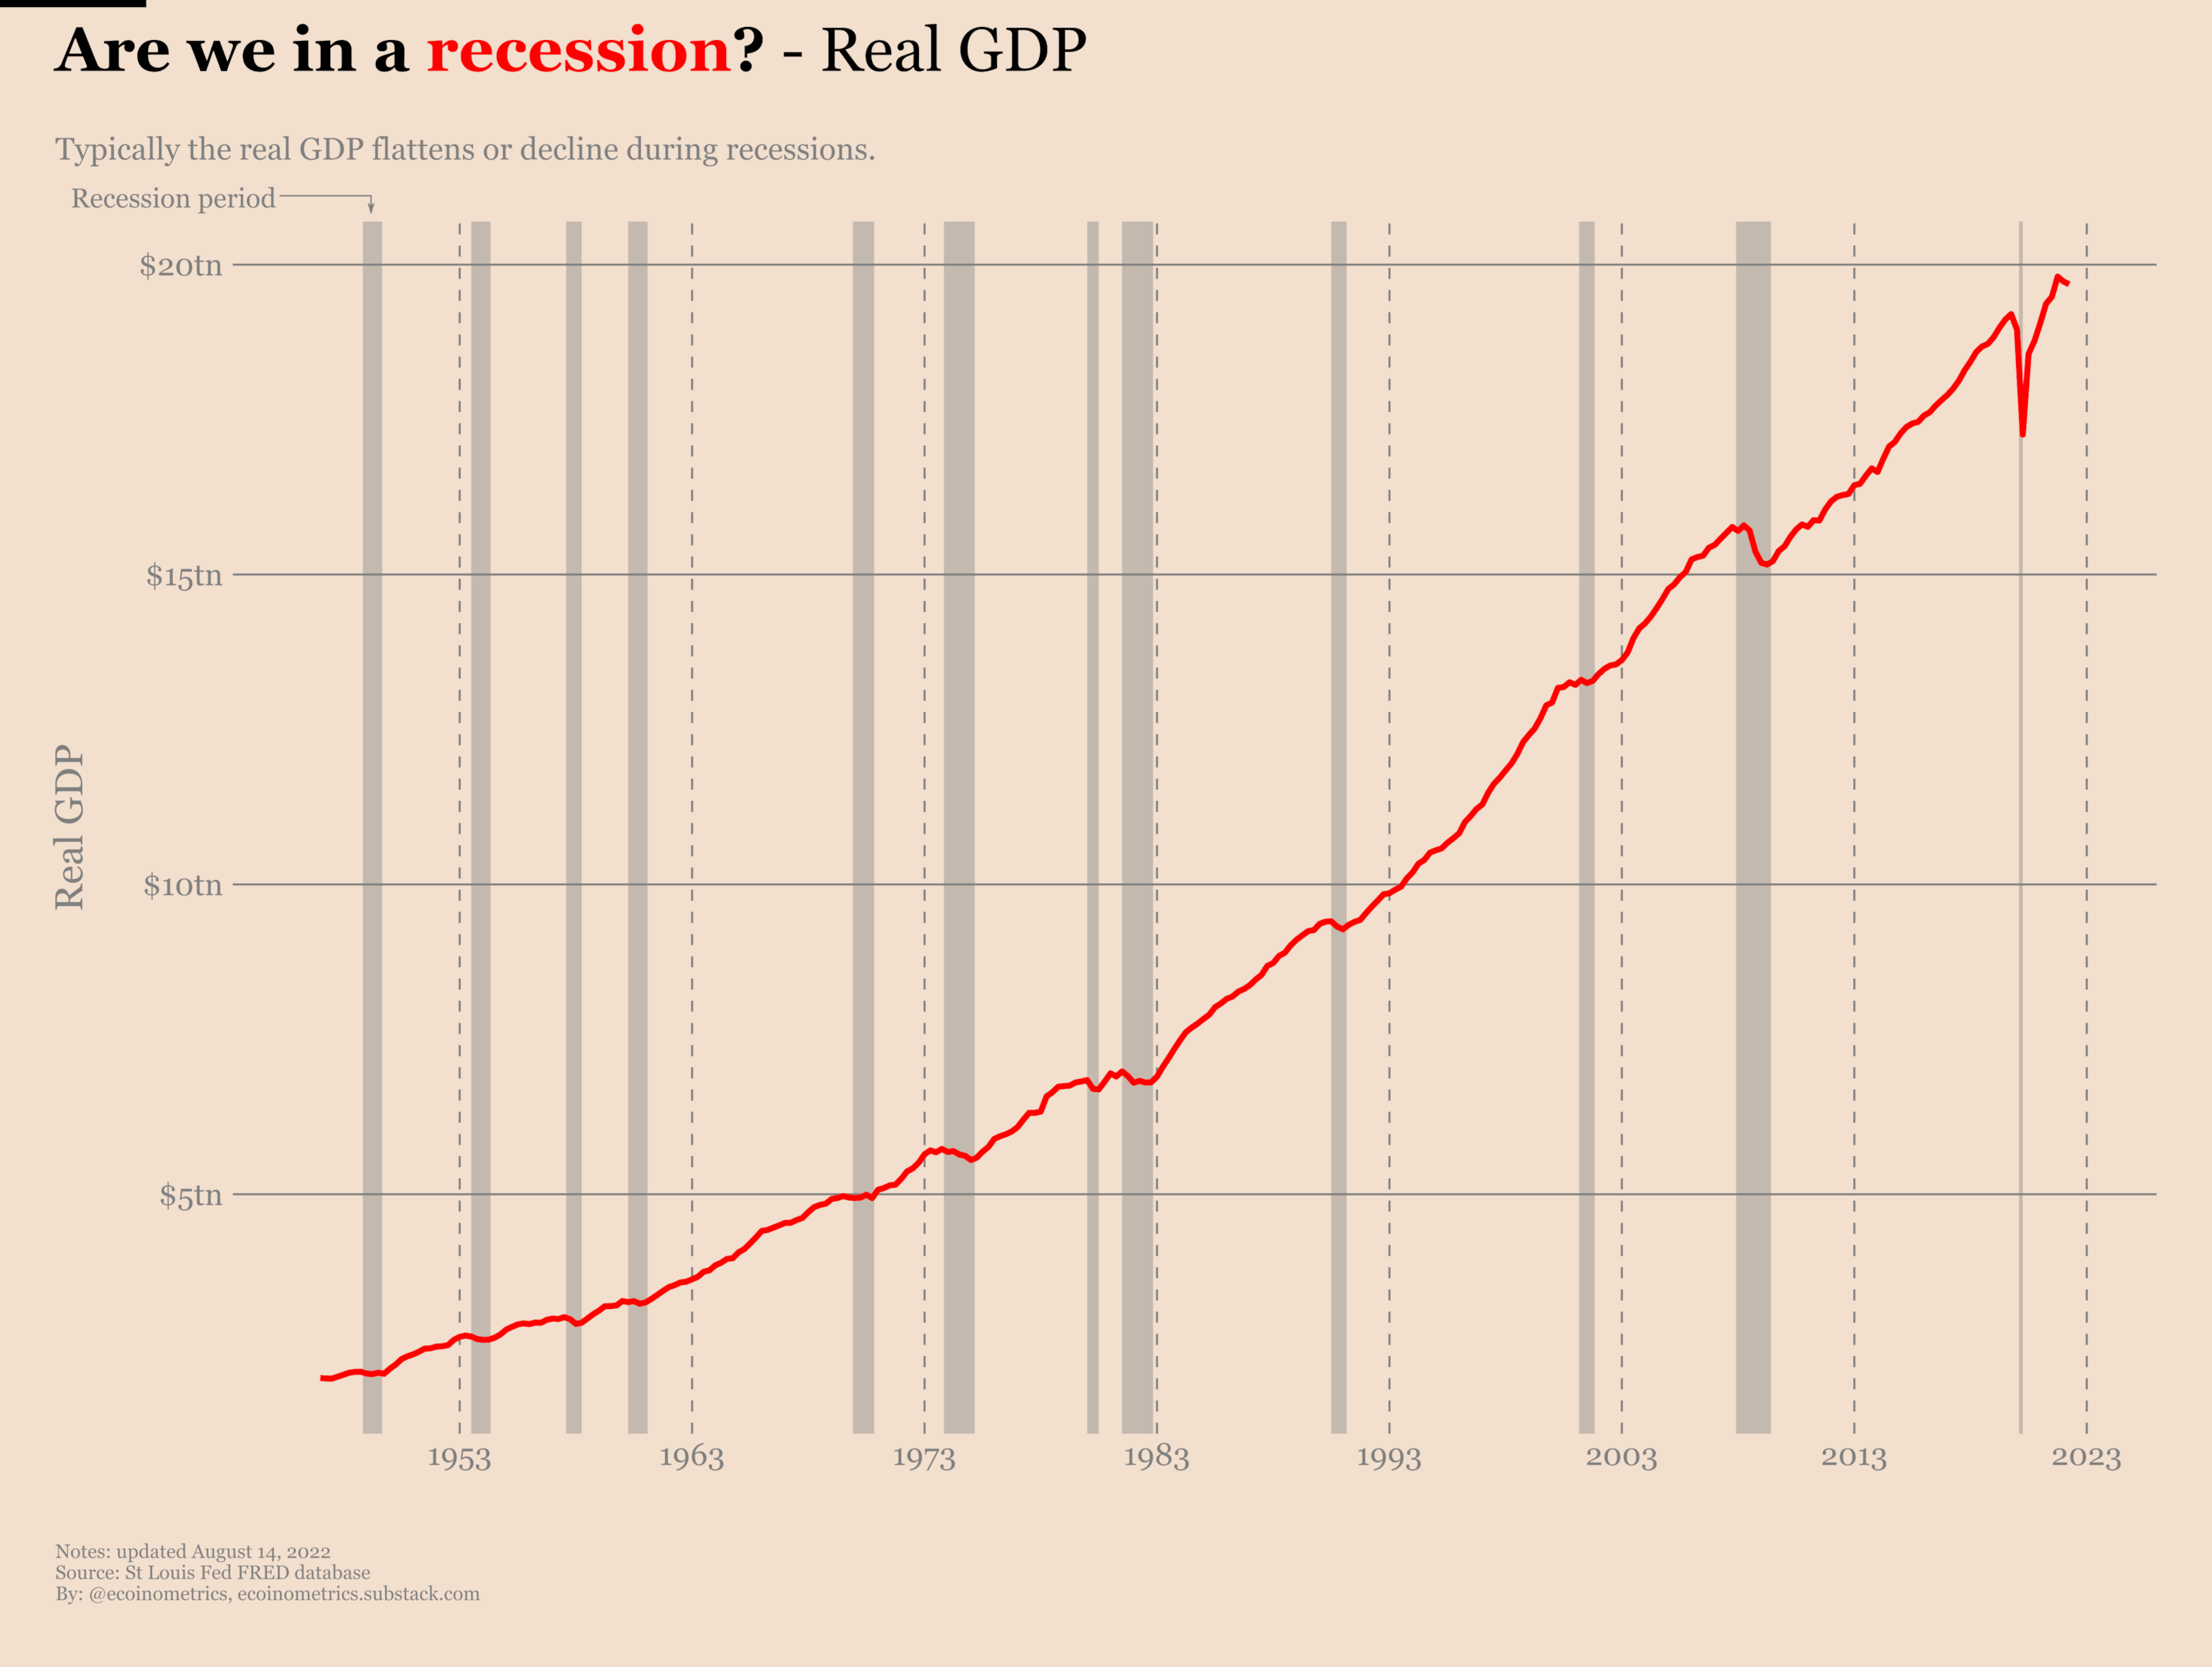 Evolution of the real GDP with highlighted recession periods.